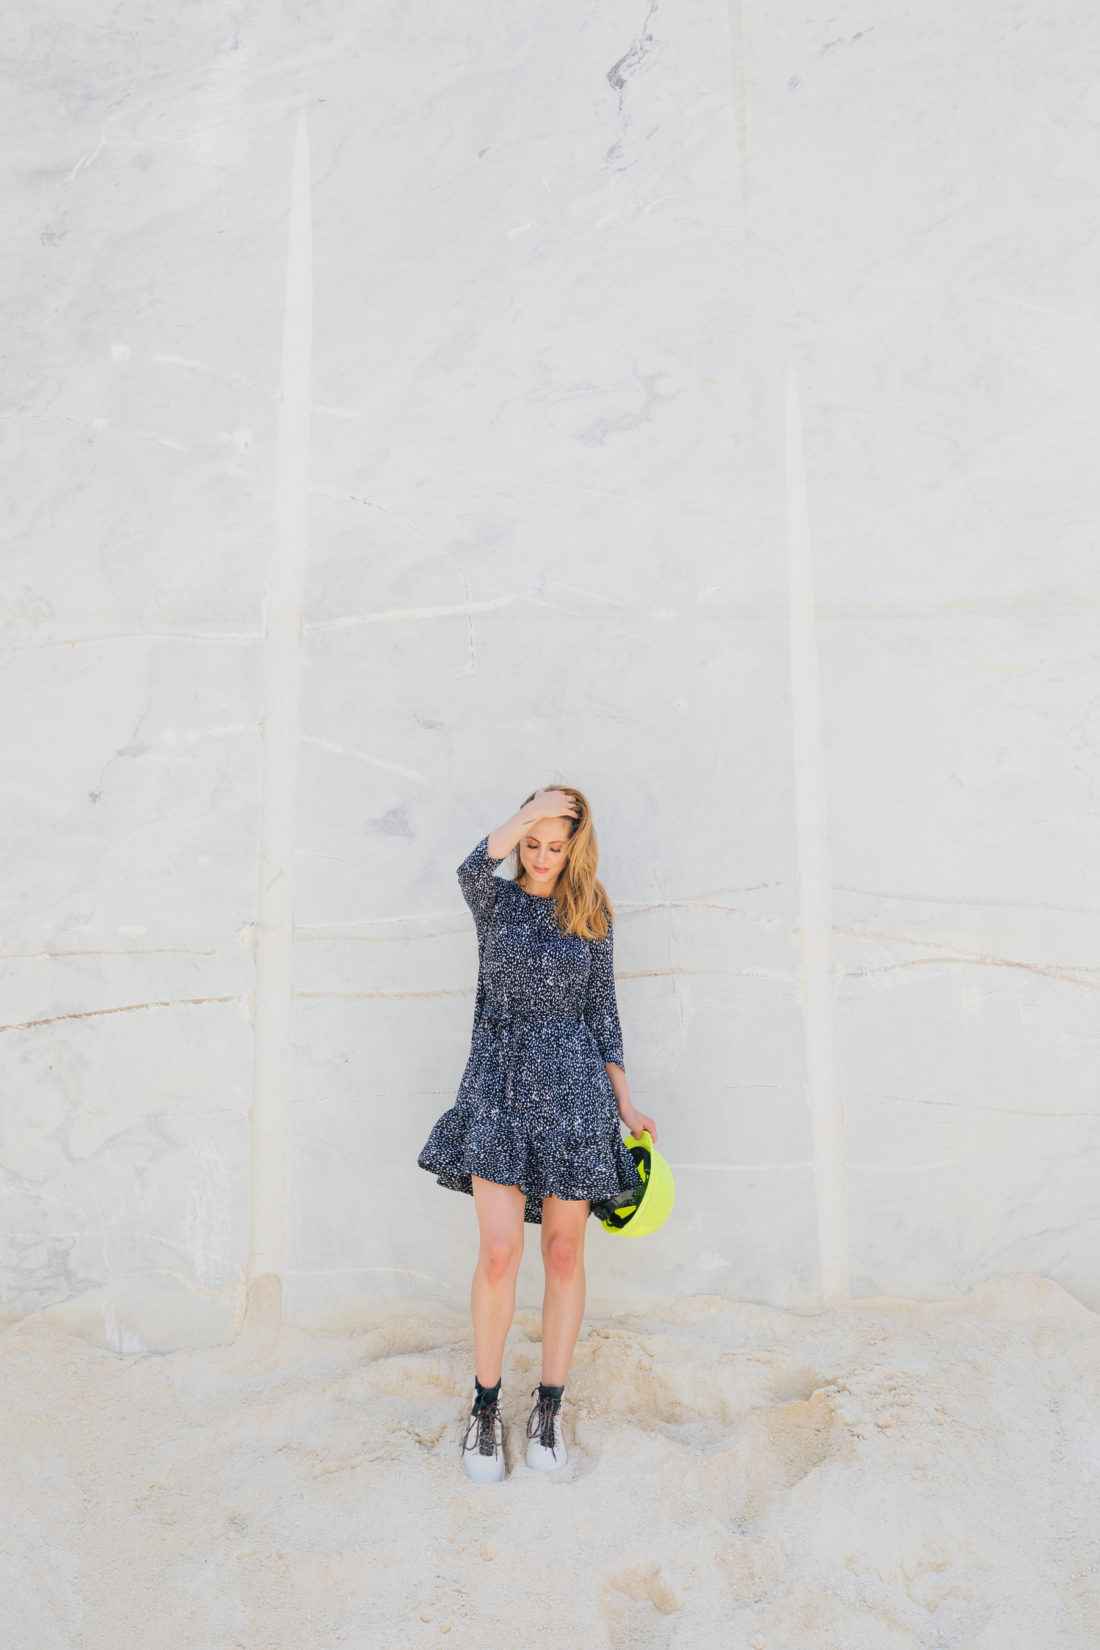 Eva Amurri Martino stands in front of a giant slab of marble at the Polycor quarry in Georgia